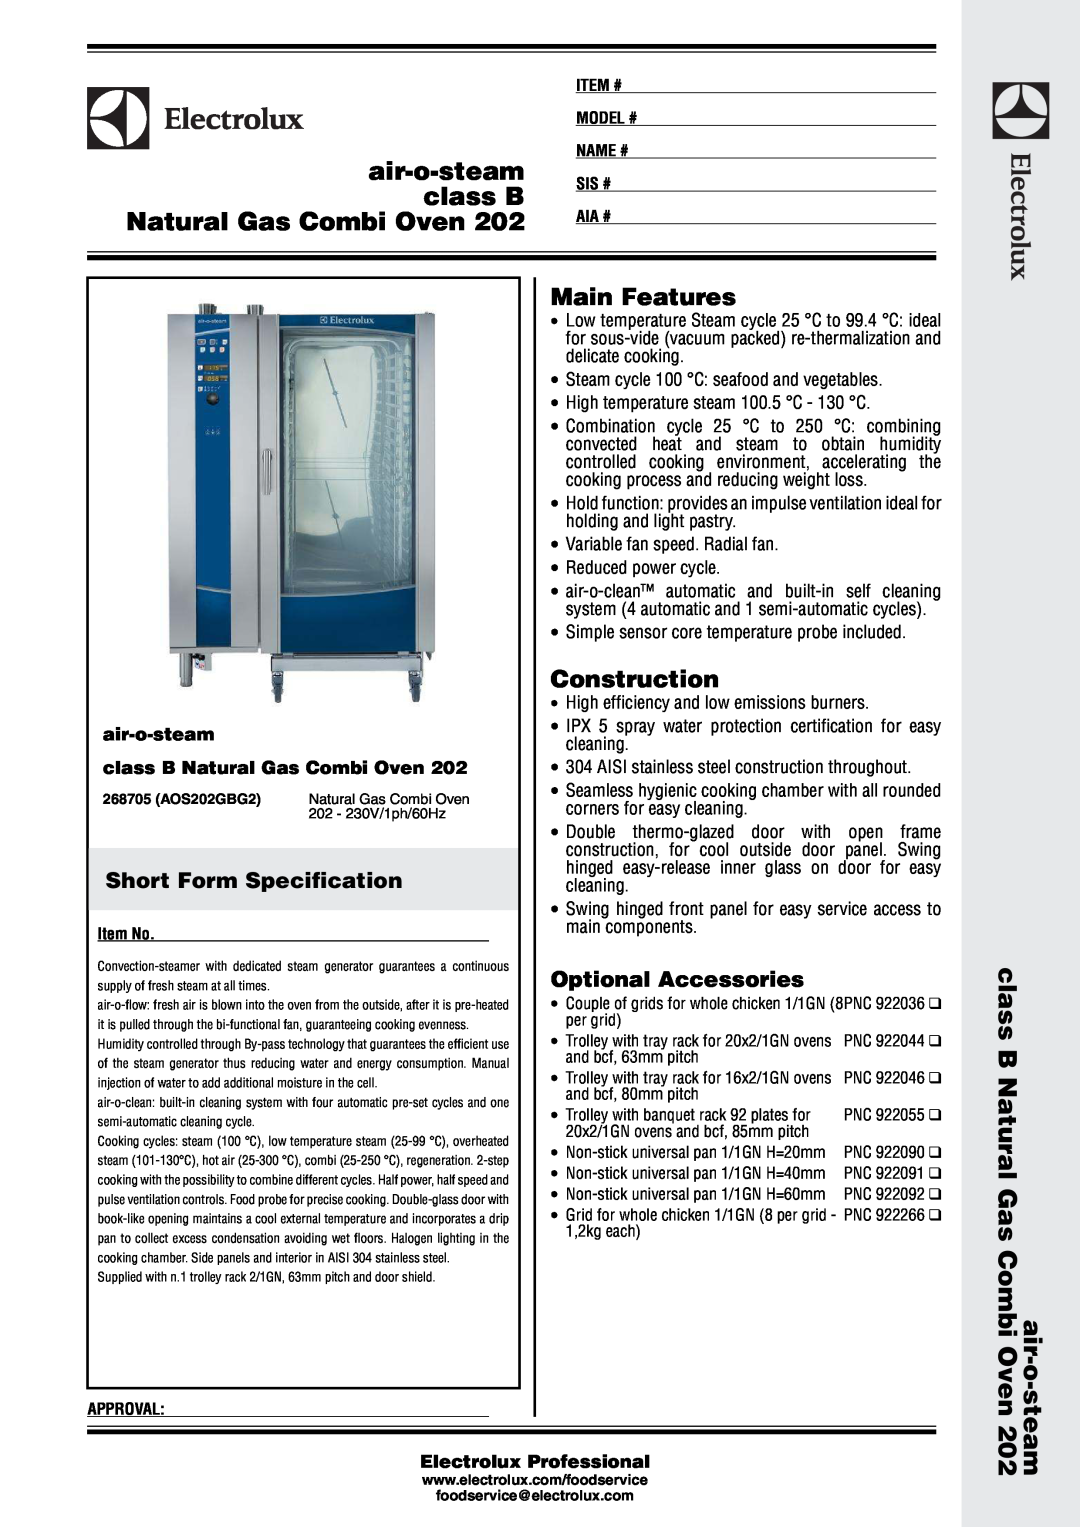 Electrolux 202 warranty Short Form Speciﬁcation, air-o-steam, TOUCHLINE Electric Combi Oven, Electrolux Professional 